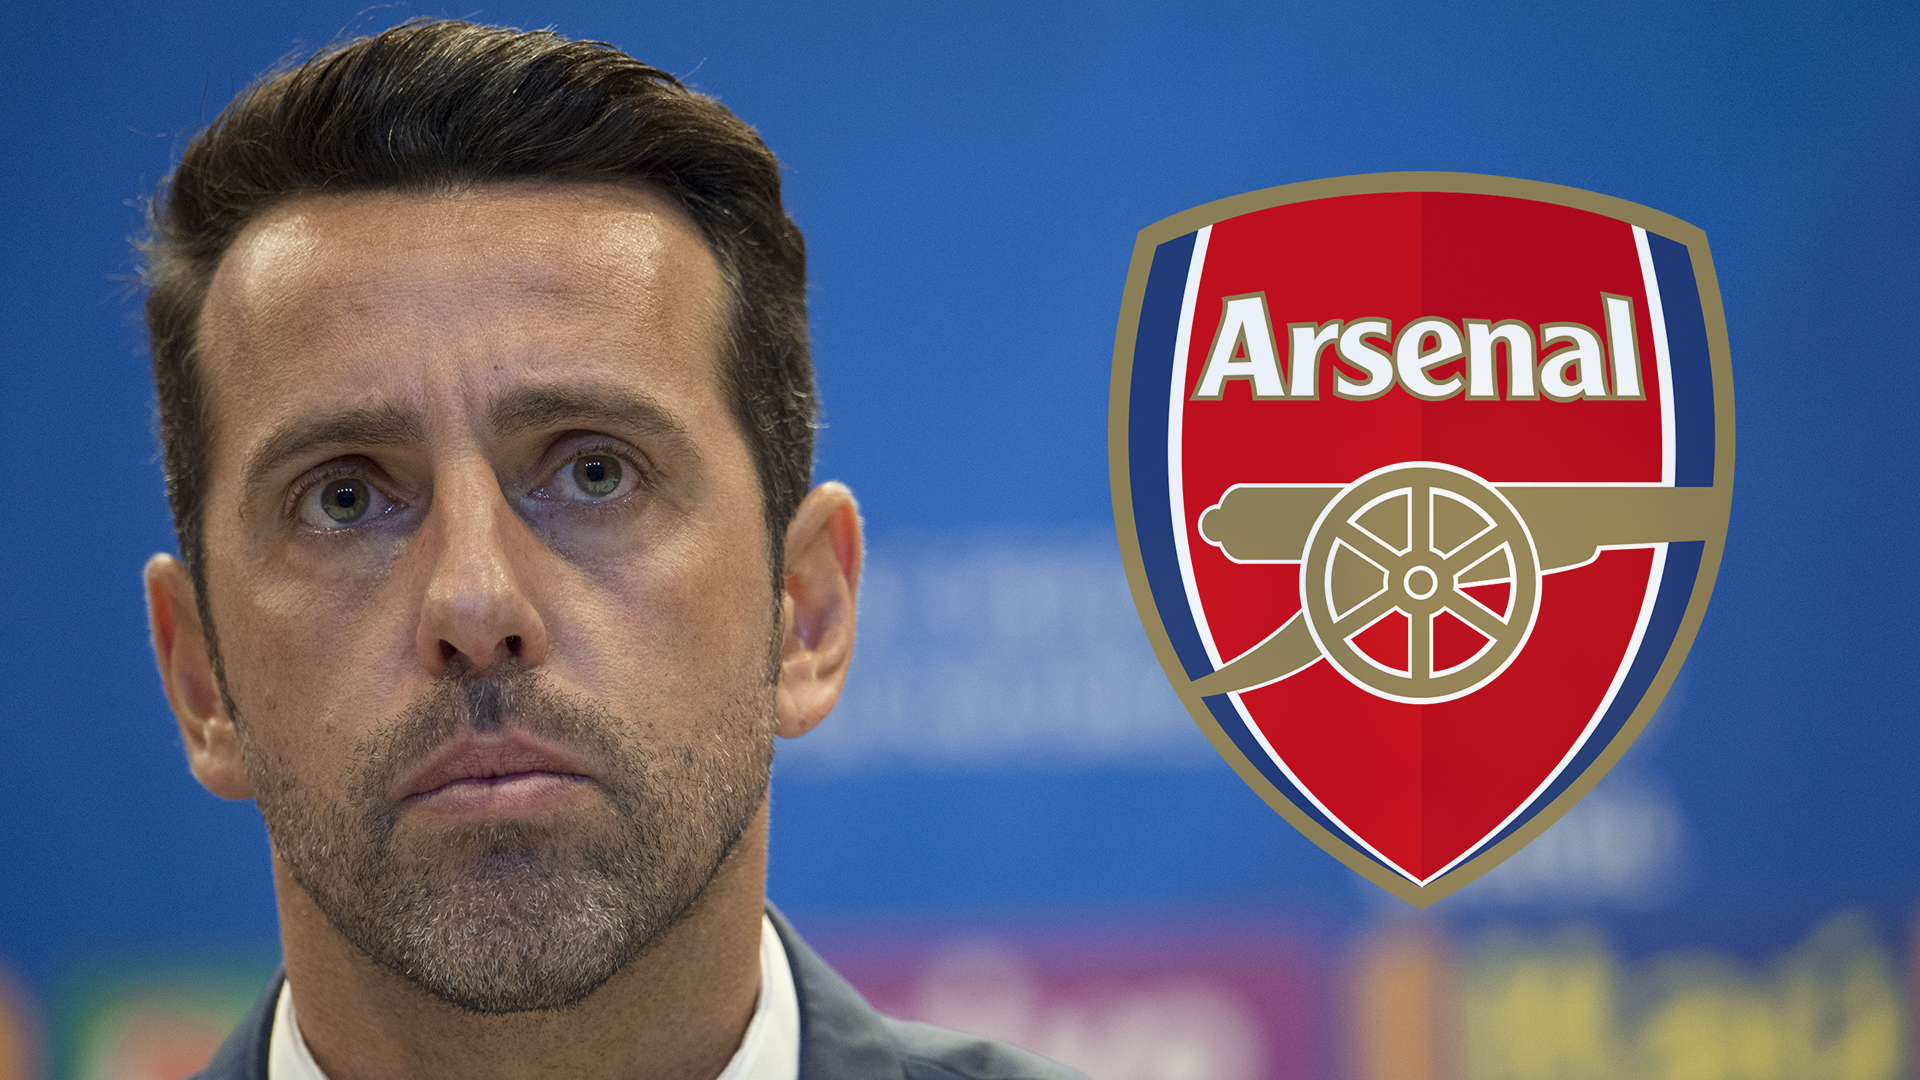 Edu proud of his Arsenal promotion “let’s keep moving forward”